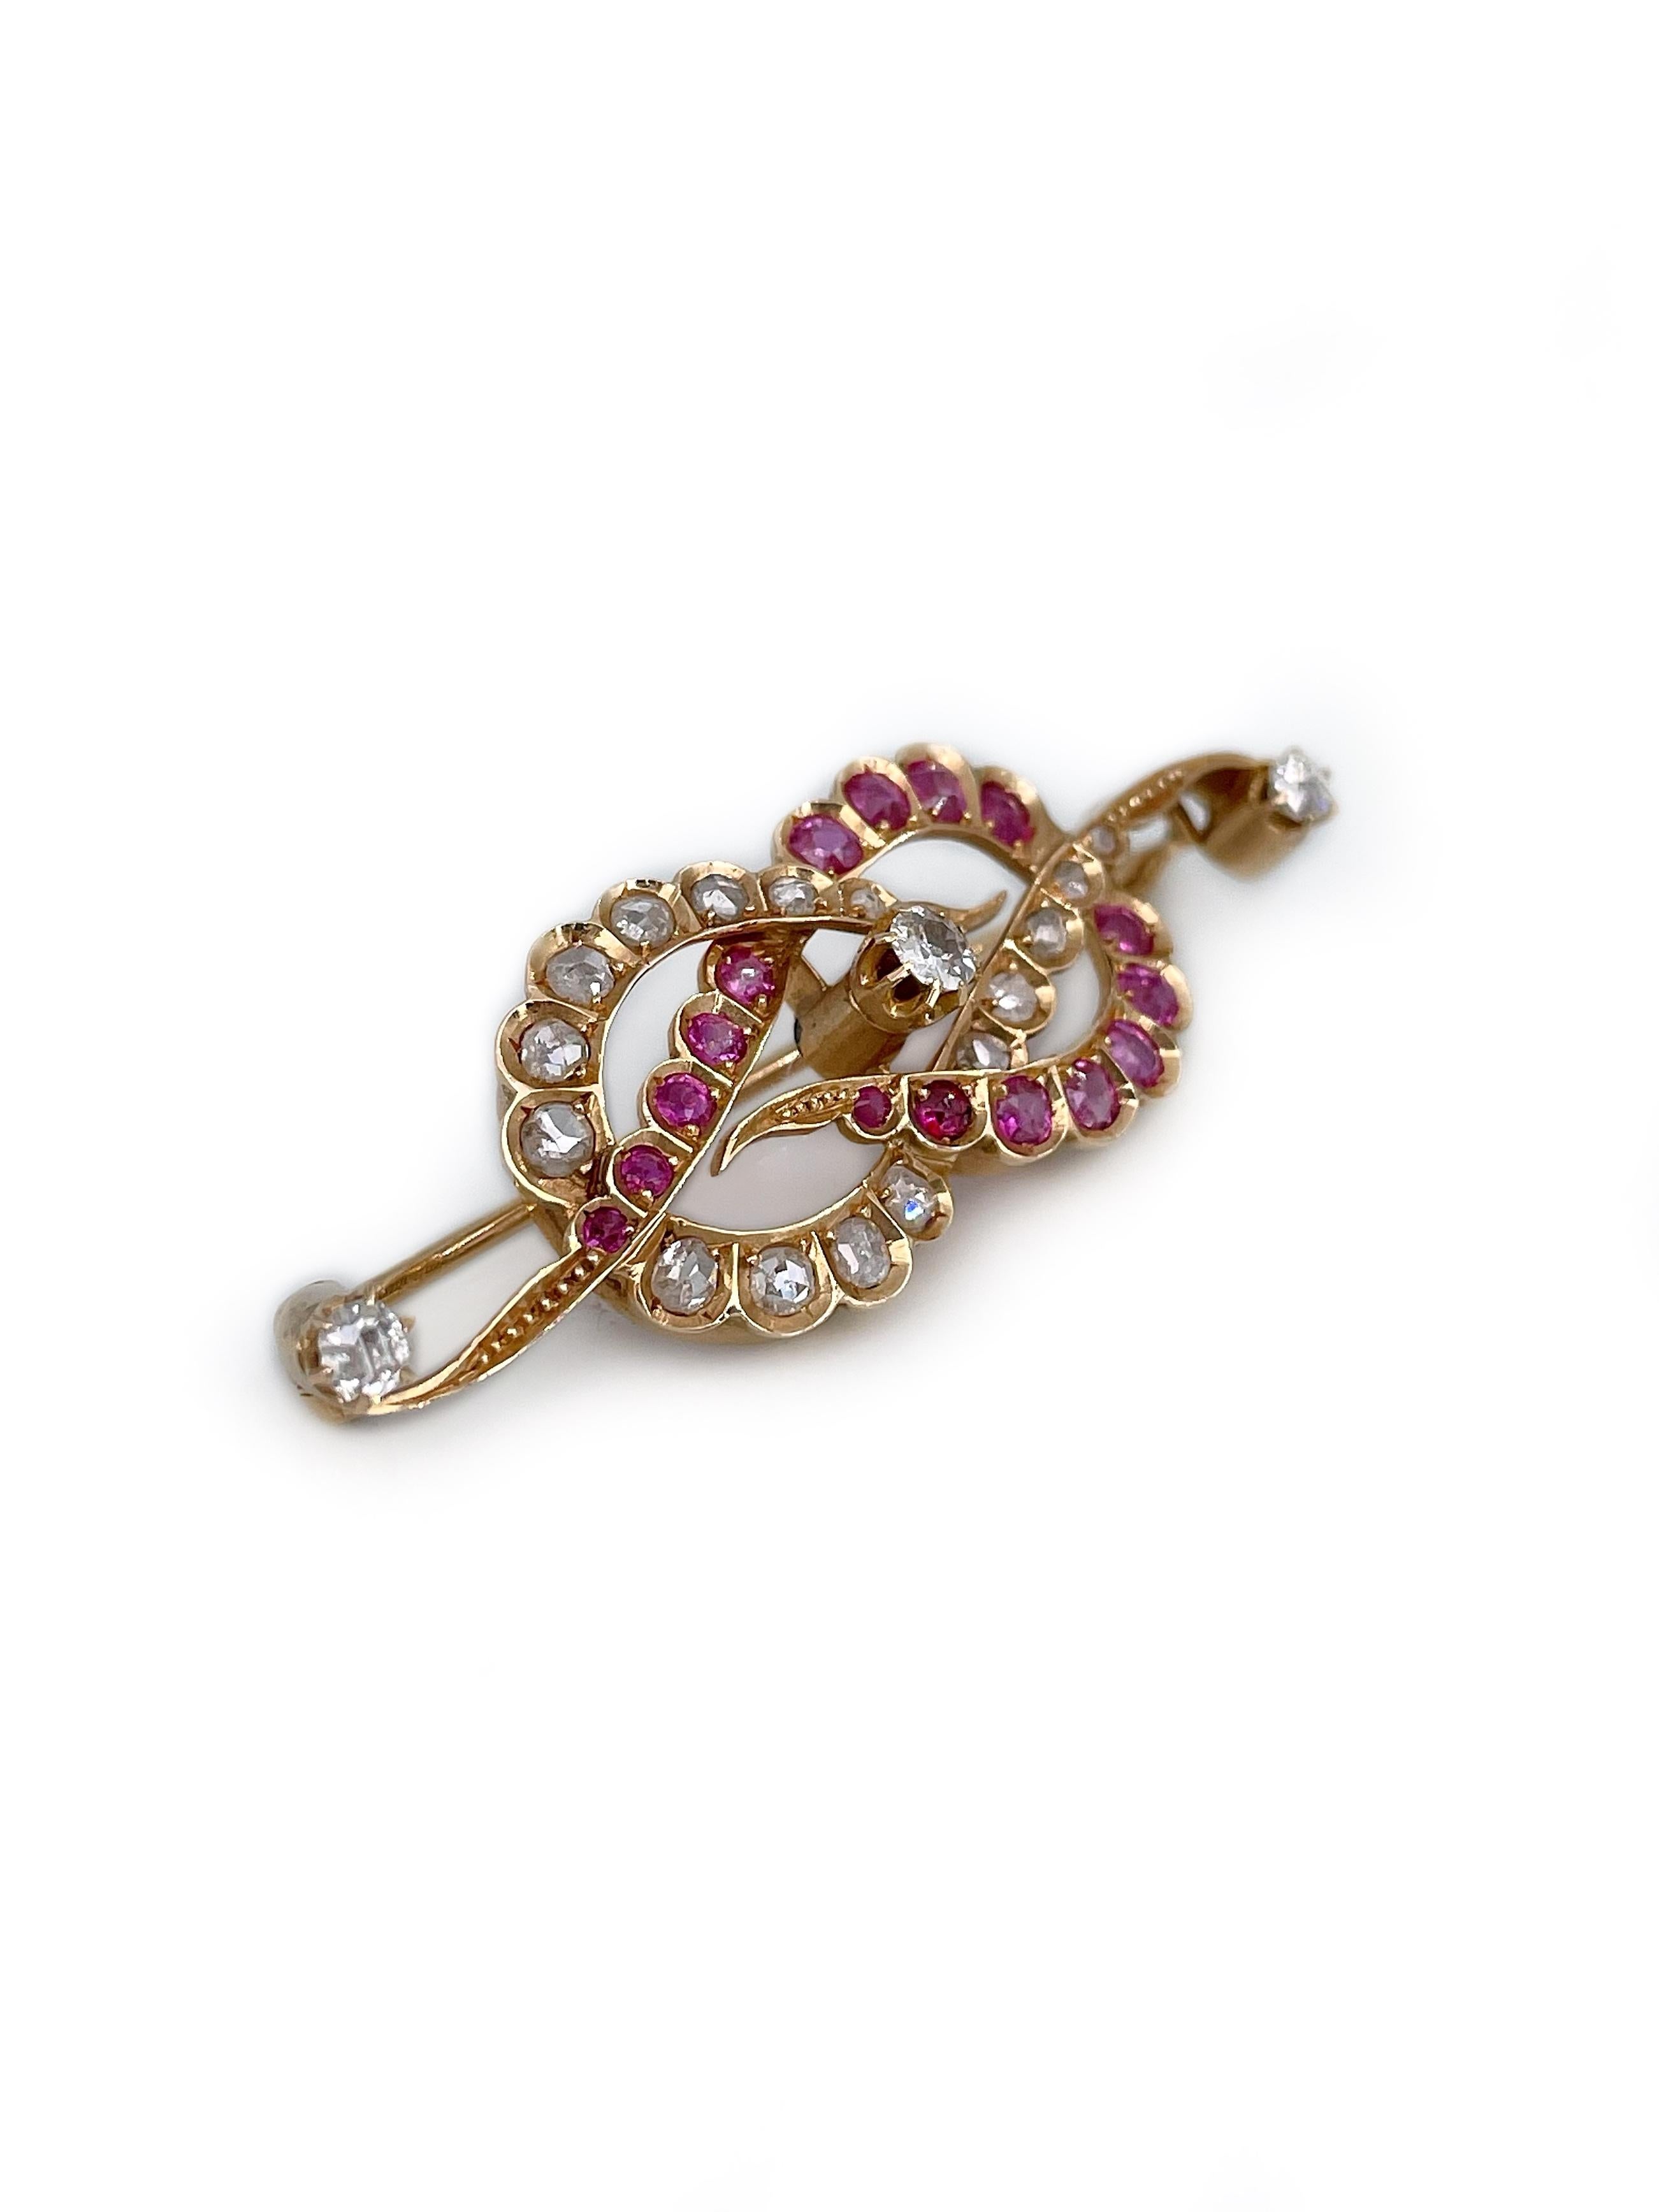 This is a Victorian knot pin brooch crafted in 14K gold. 

The piece features:
- 30 rubies (round/cushion cut, TW 0.80ct, stpR 6/4, VS-P1)
- 19 diamonds (rose/irregular cut, TW 0.55ct, RW-W, VS-P1)

Weight: 5.05g
Size: 4.5x1.5cm

———

If you have